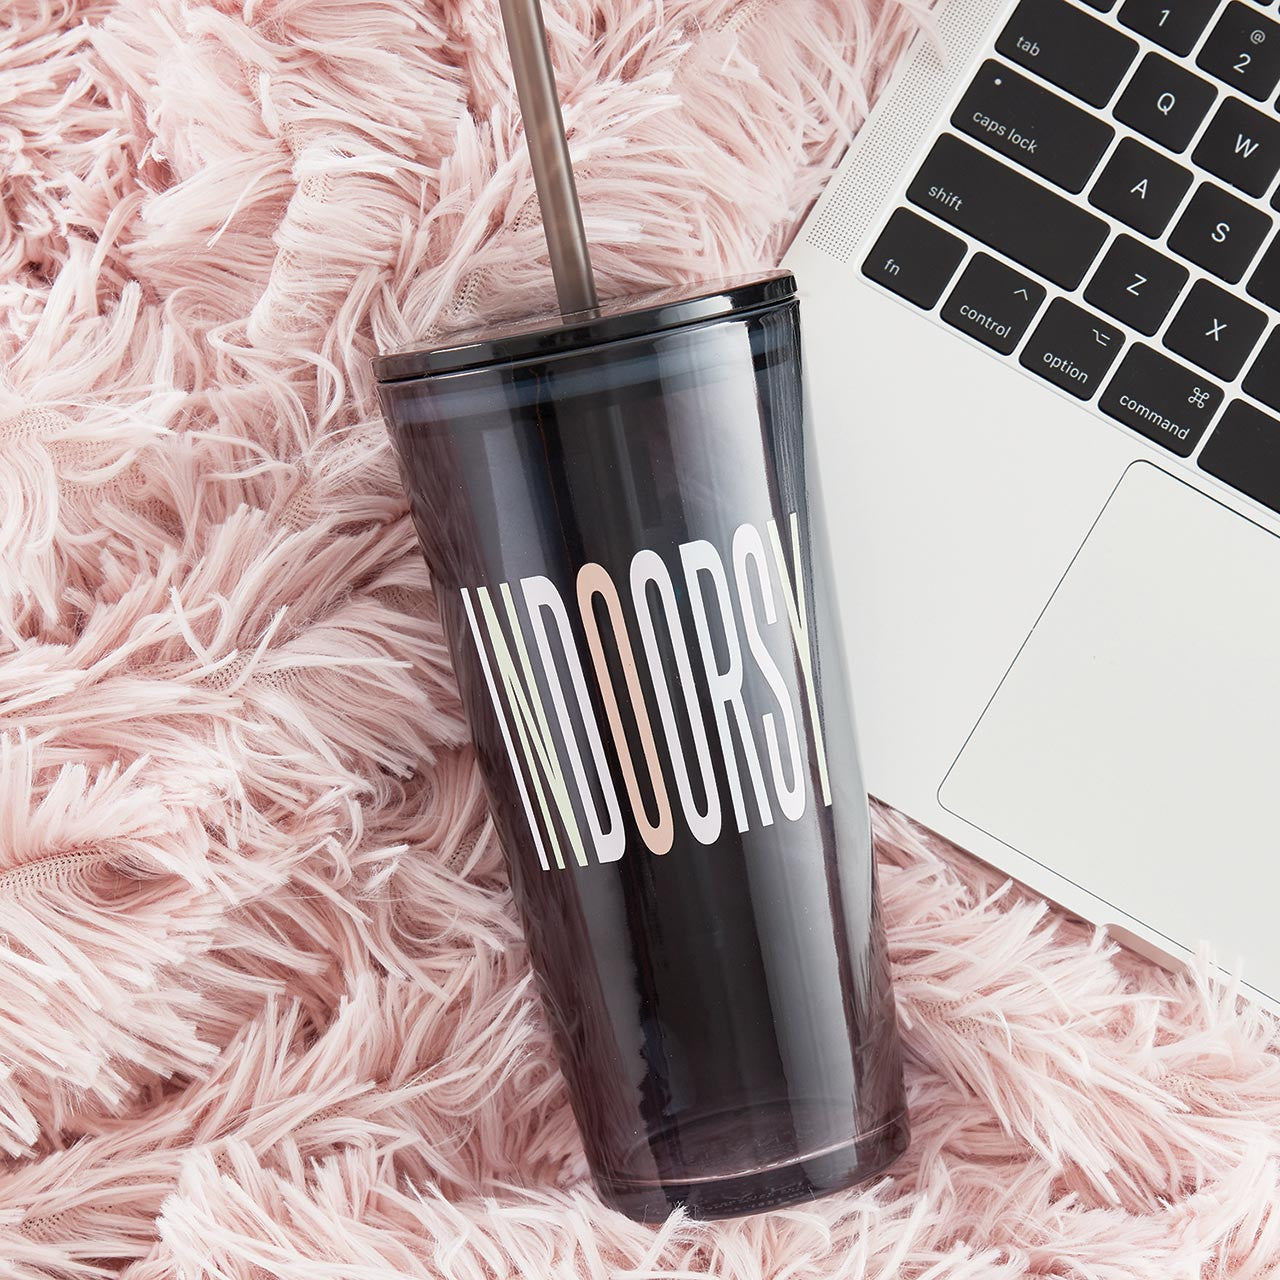 Indoorsy Glass Tumbler with Straw | Coffee Cocktail Black Glass | 20oz